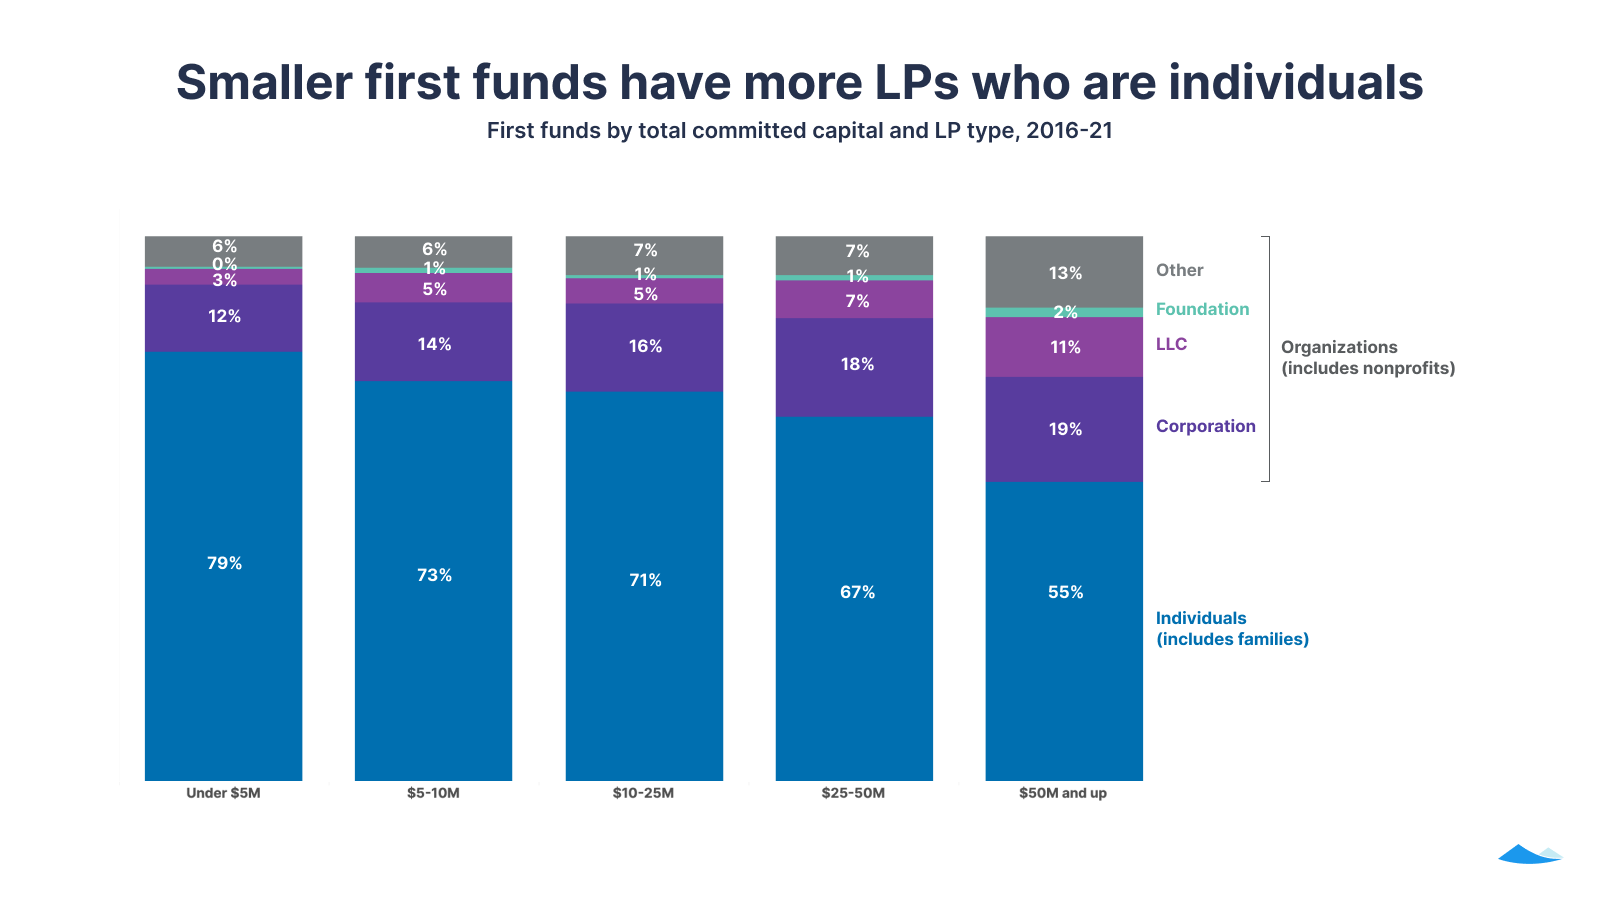 Smaller funds have more LPs who are individuals